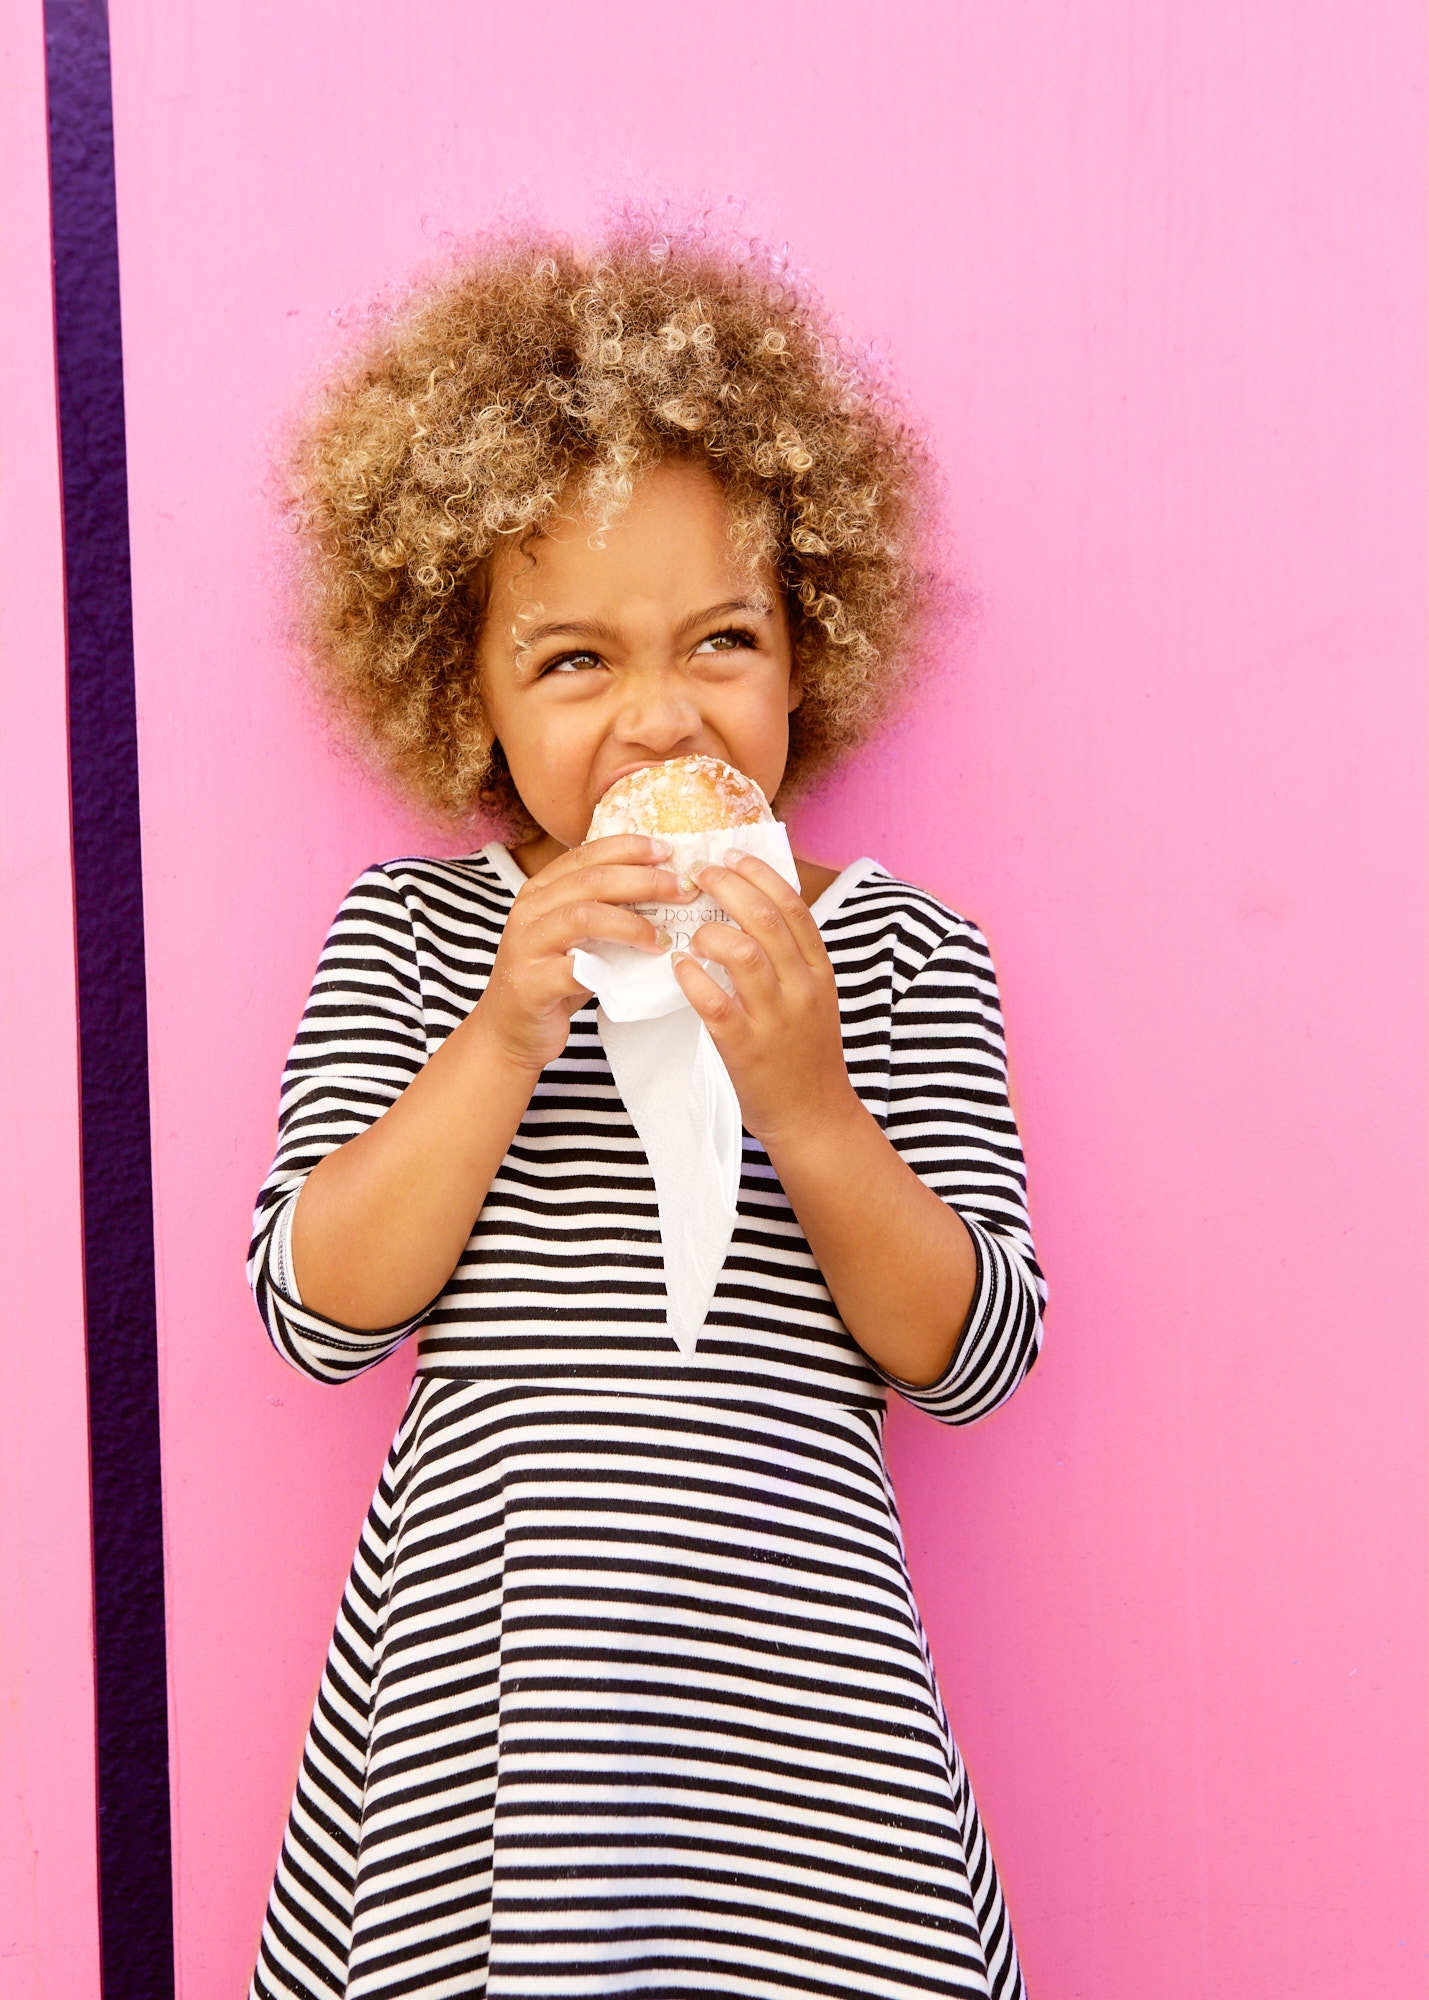 Cute little girl eats pastry against bright pink wall in Temescal Alley